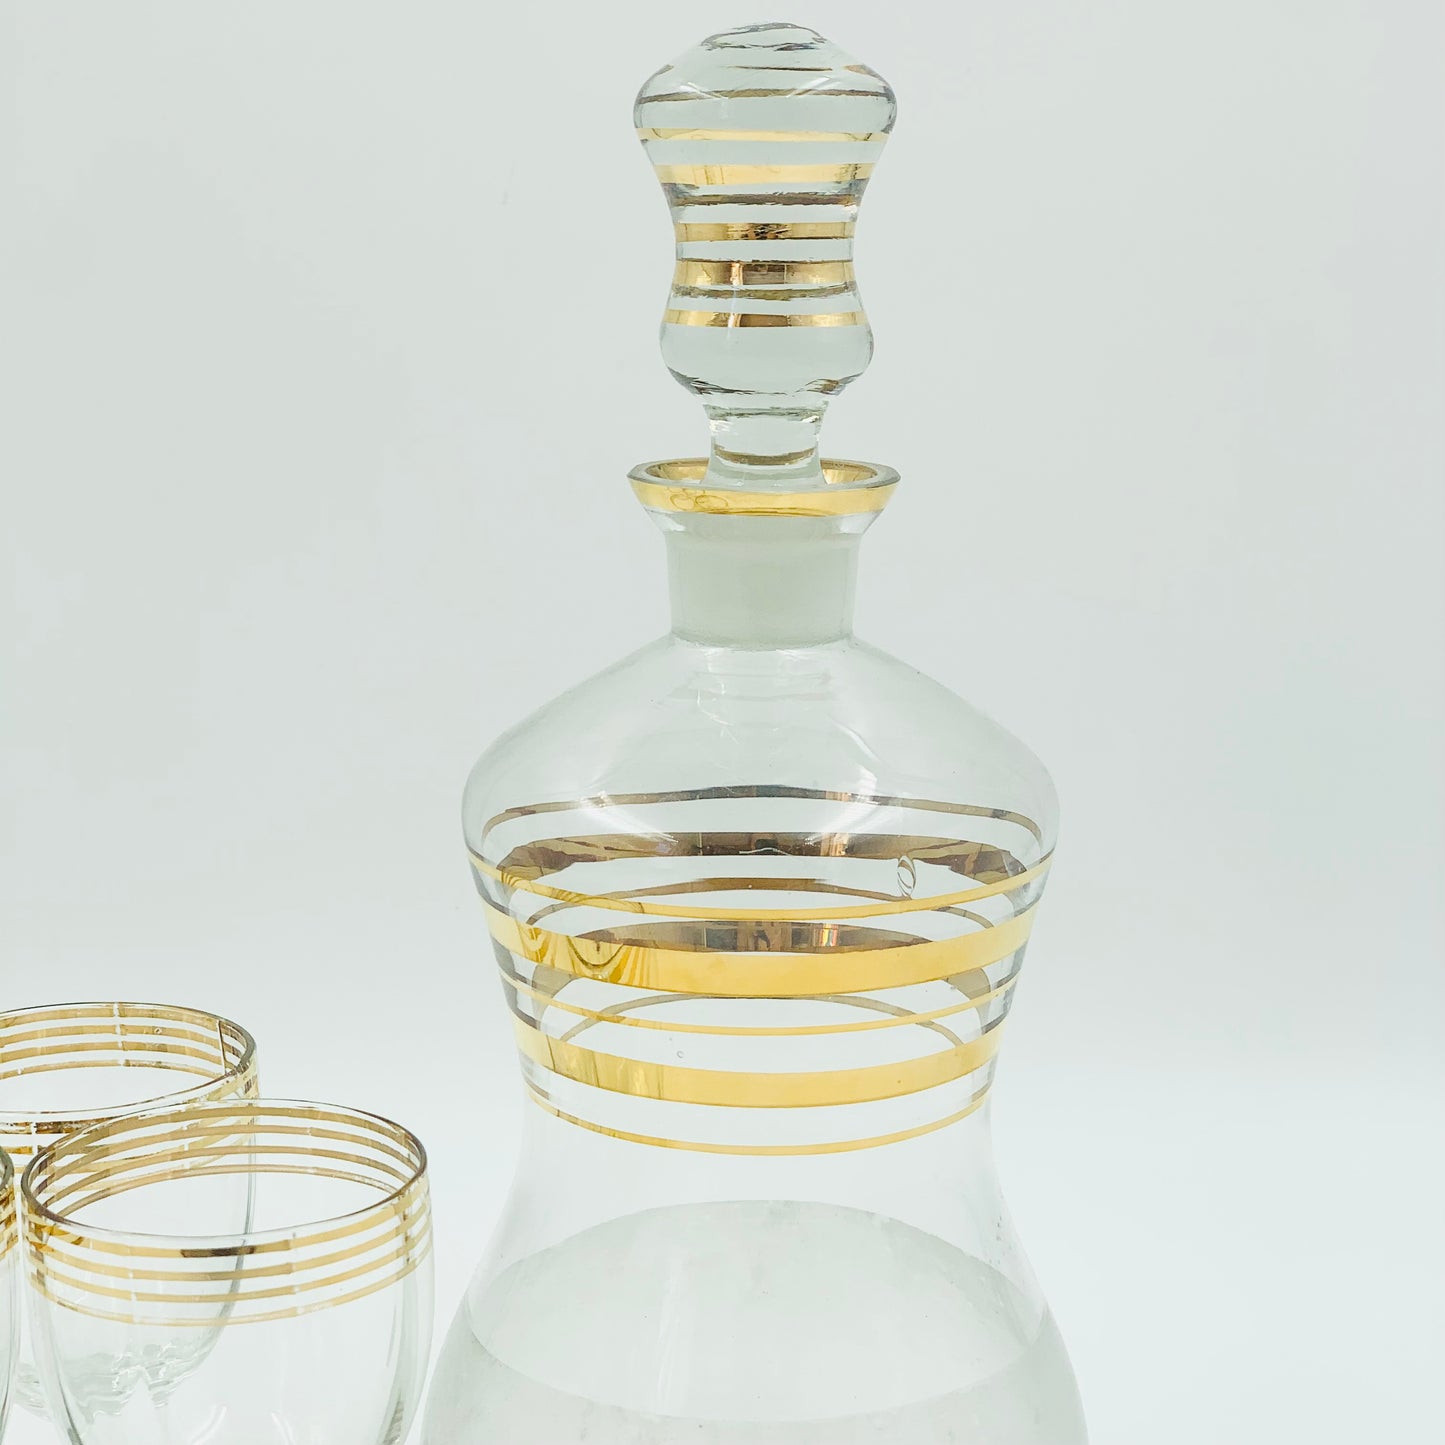 Midcentury decanter glass set with gold bands